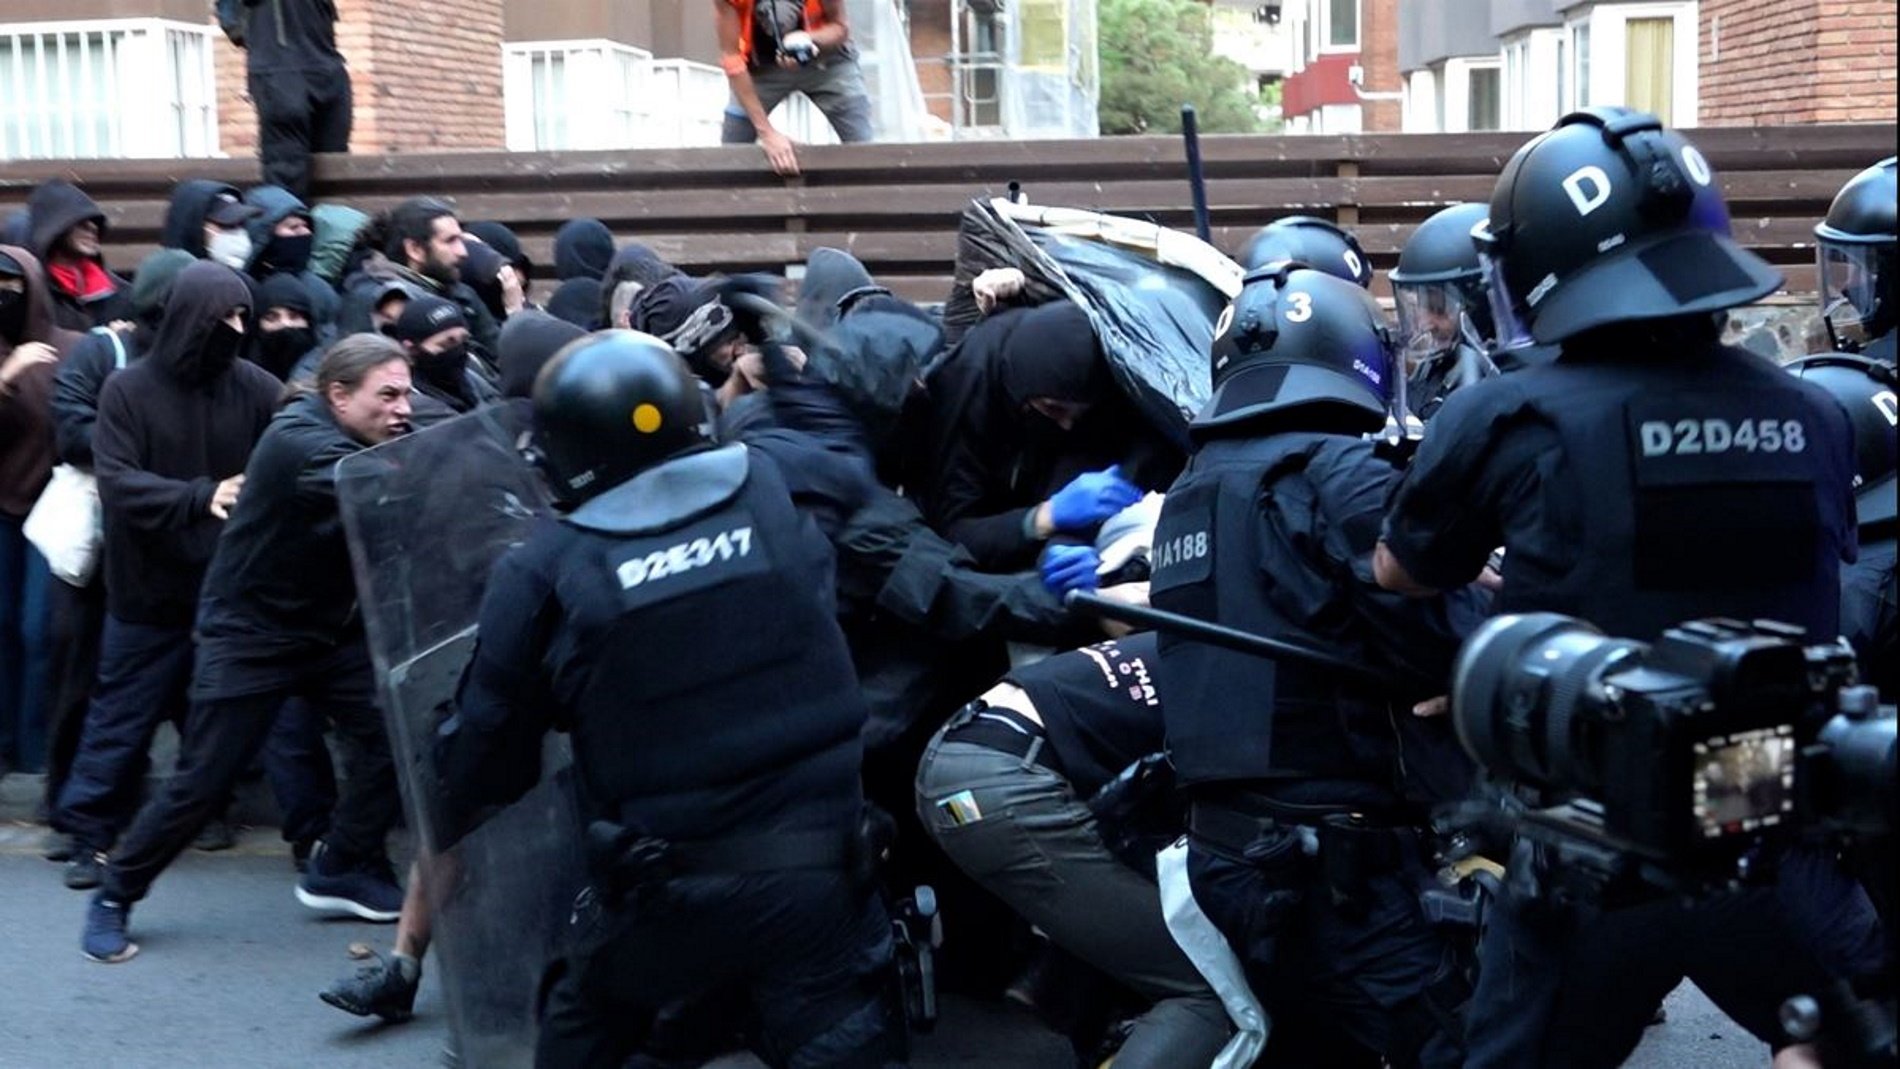 Police use batons in uptown Barcelona district as pro and anti-squatter groups march | VIDEO